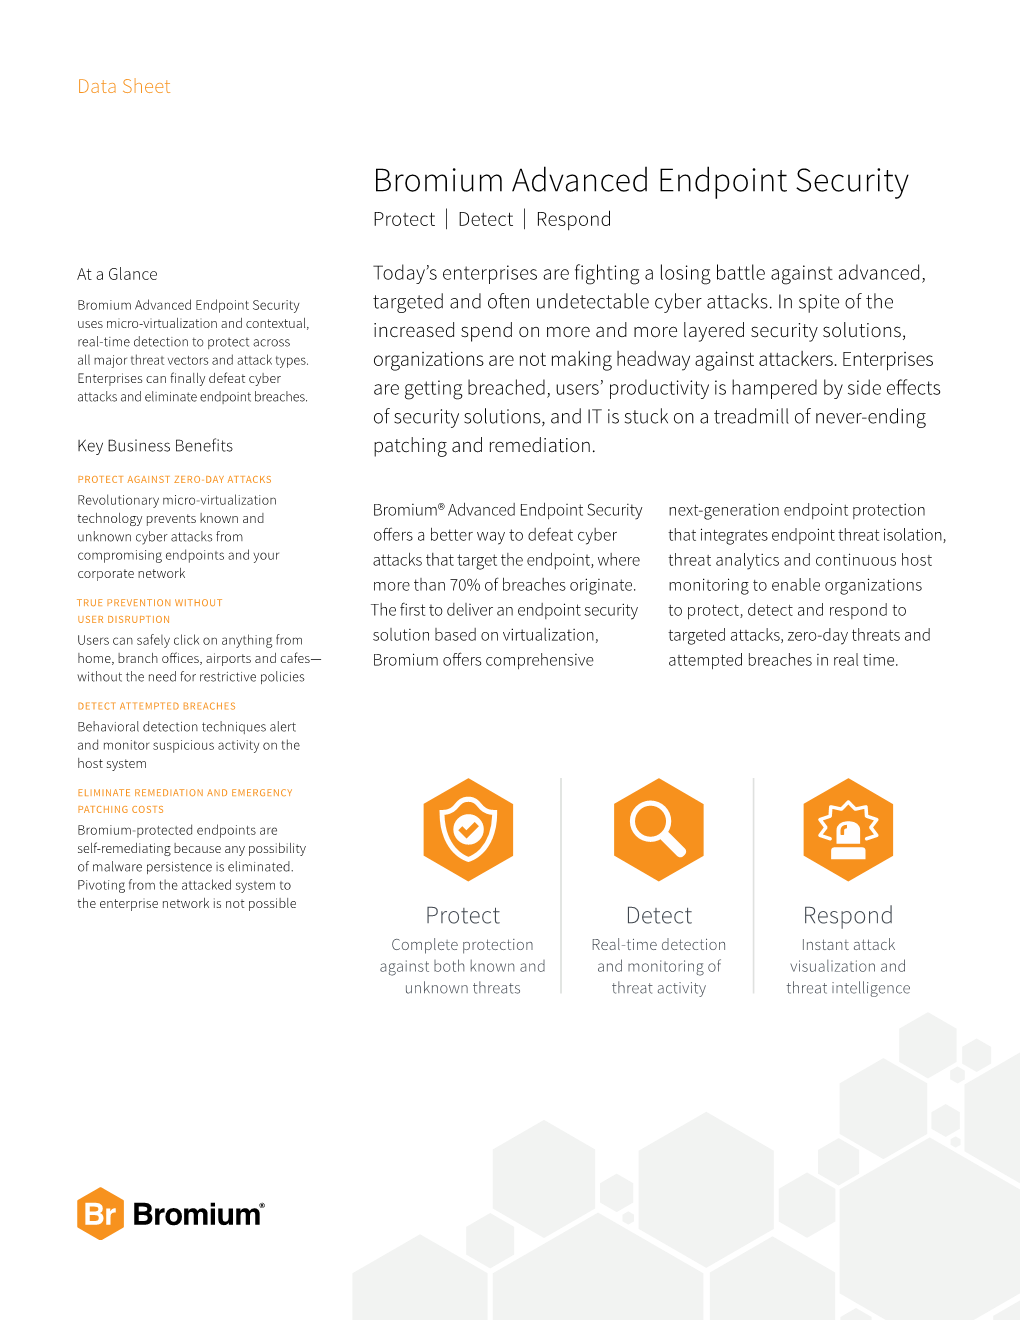 Bromium Advanced Endpoint Security Protect | Detect | Respond